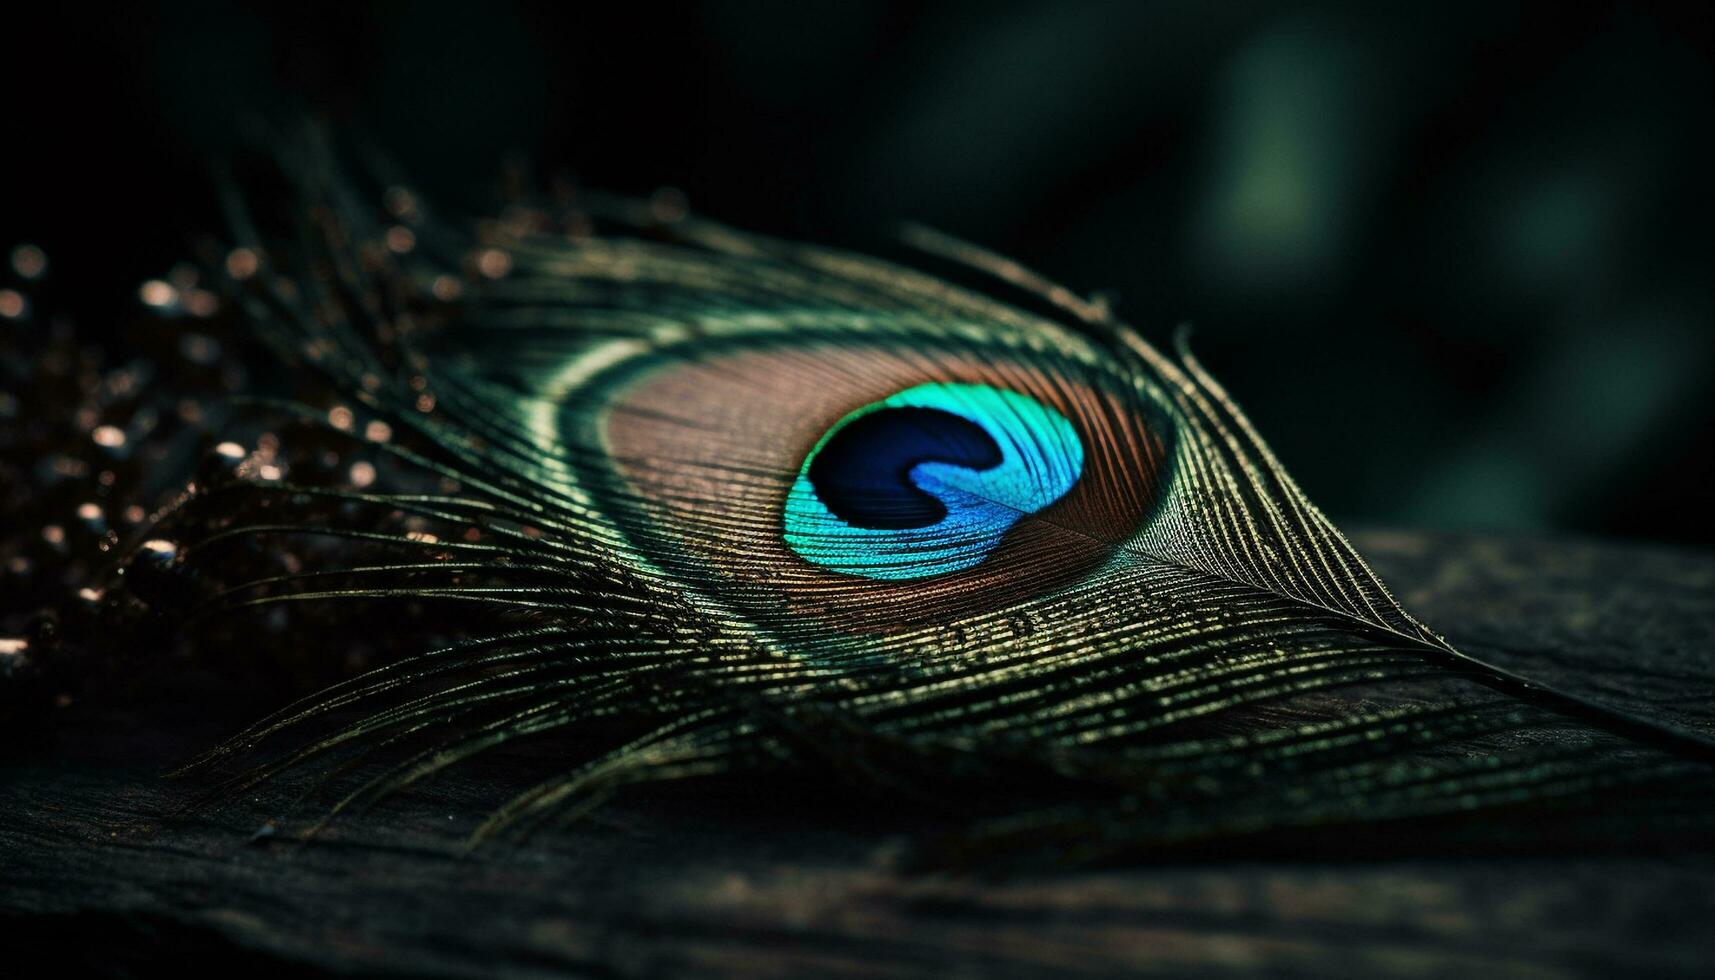 Peacock iridescent feathers showcase nature vibrant elegance generated by AI photo